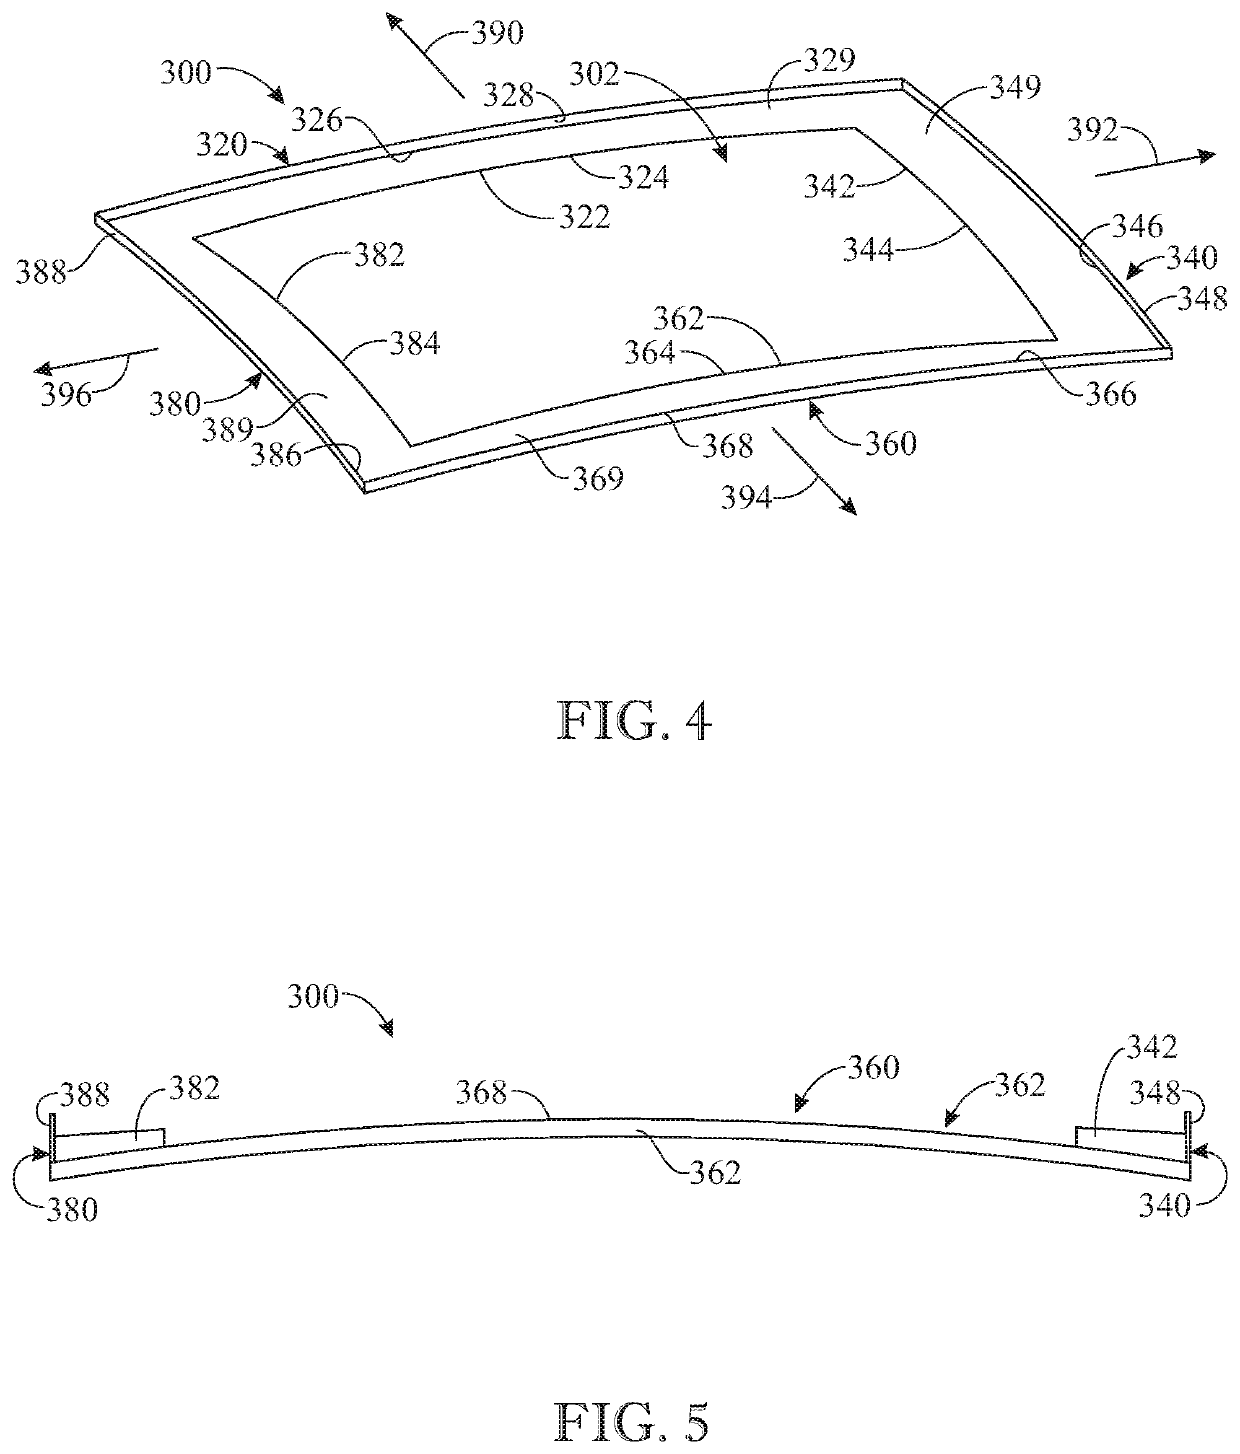 Fixed-wing flying device configured to fly in multiple directions